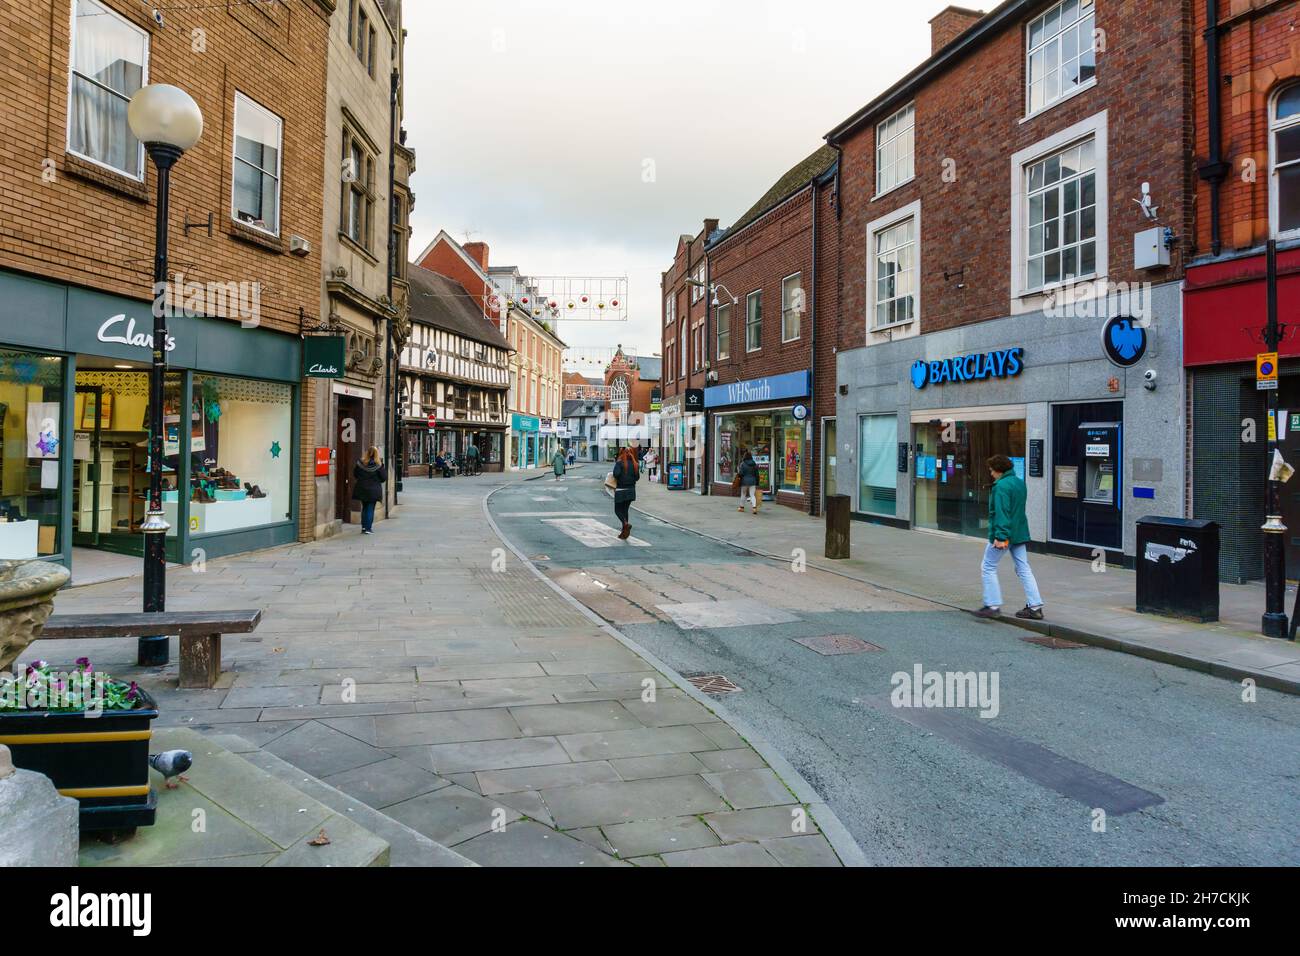 Shops and shoppers on Cross street in the town of Oswestry North Shropshire England Stock Photo